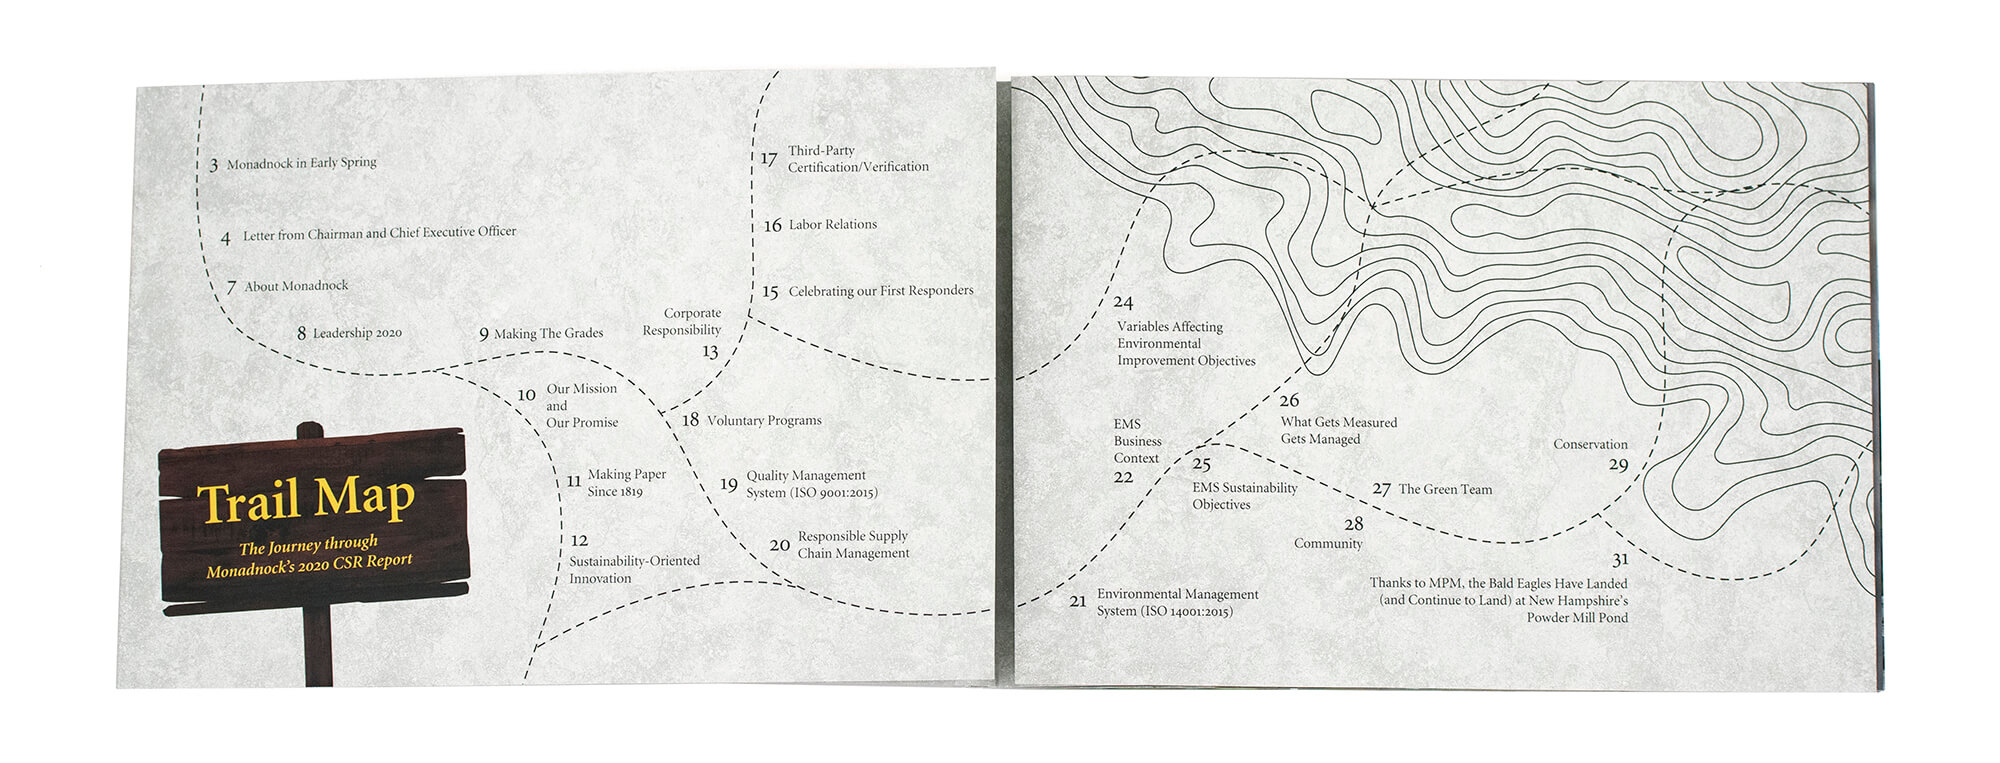 Trail Map Table of Contents